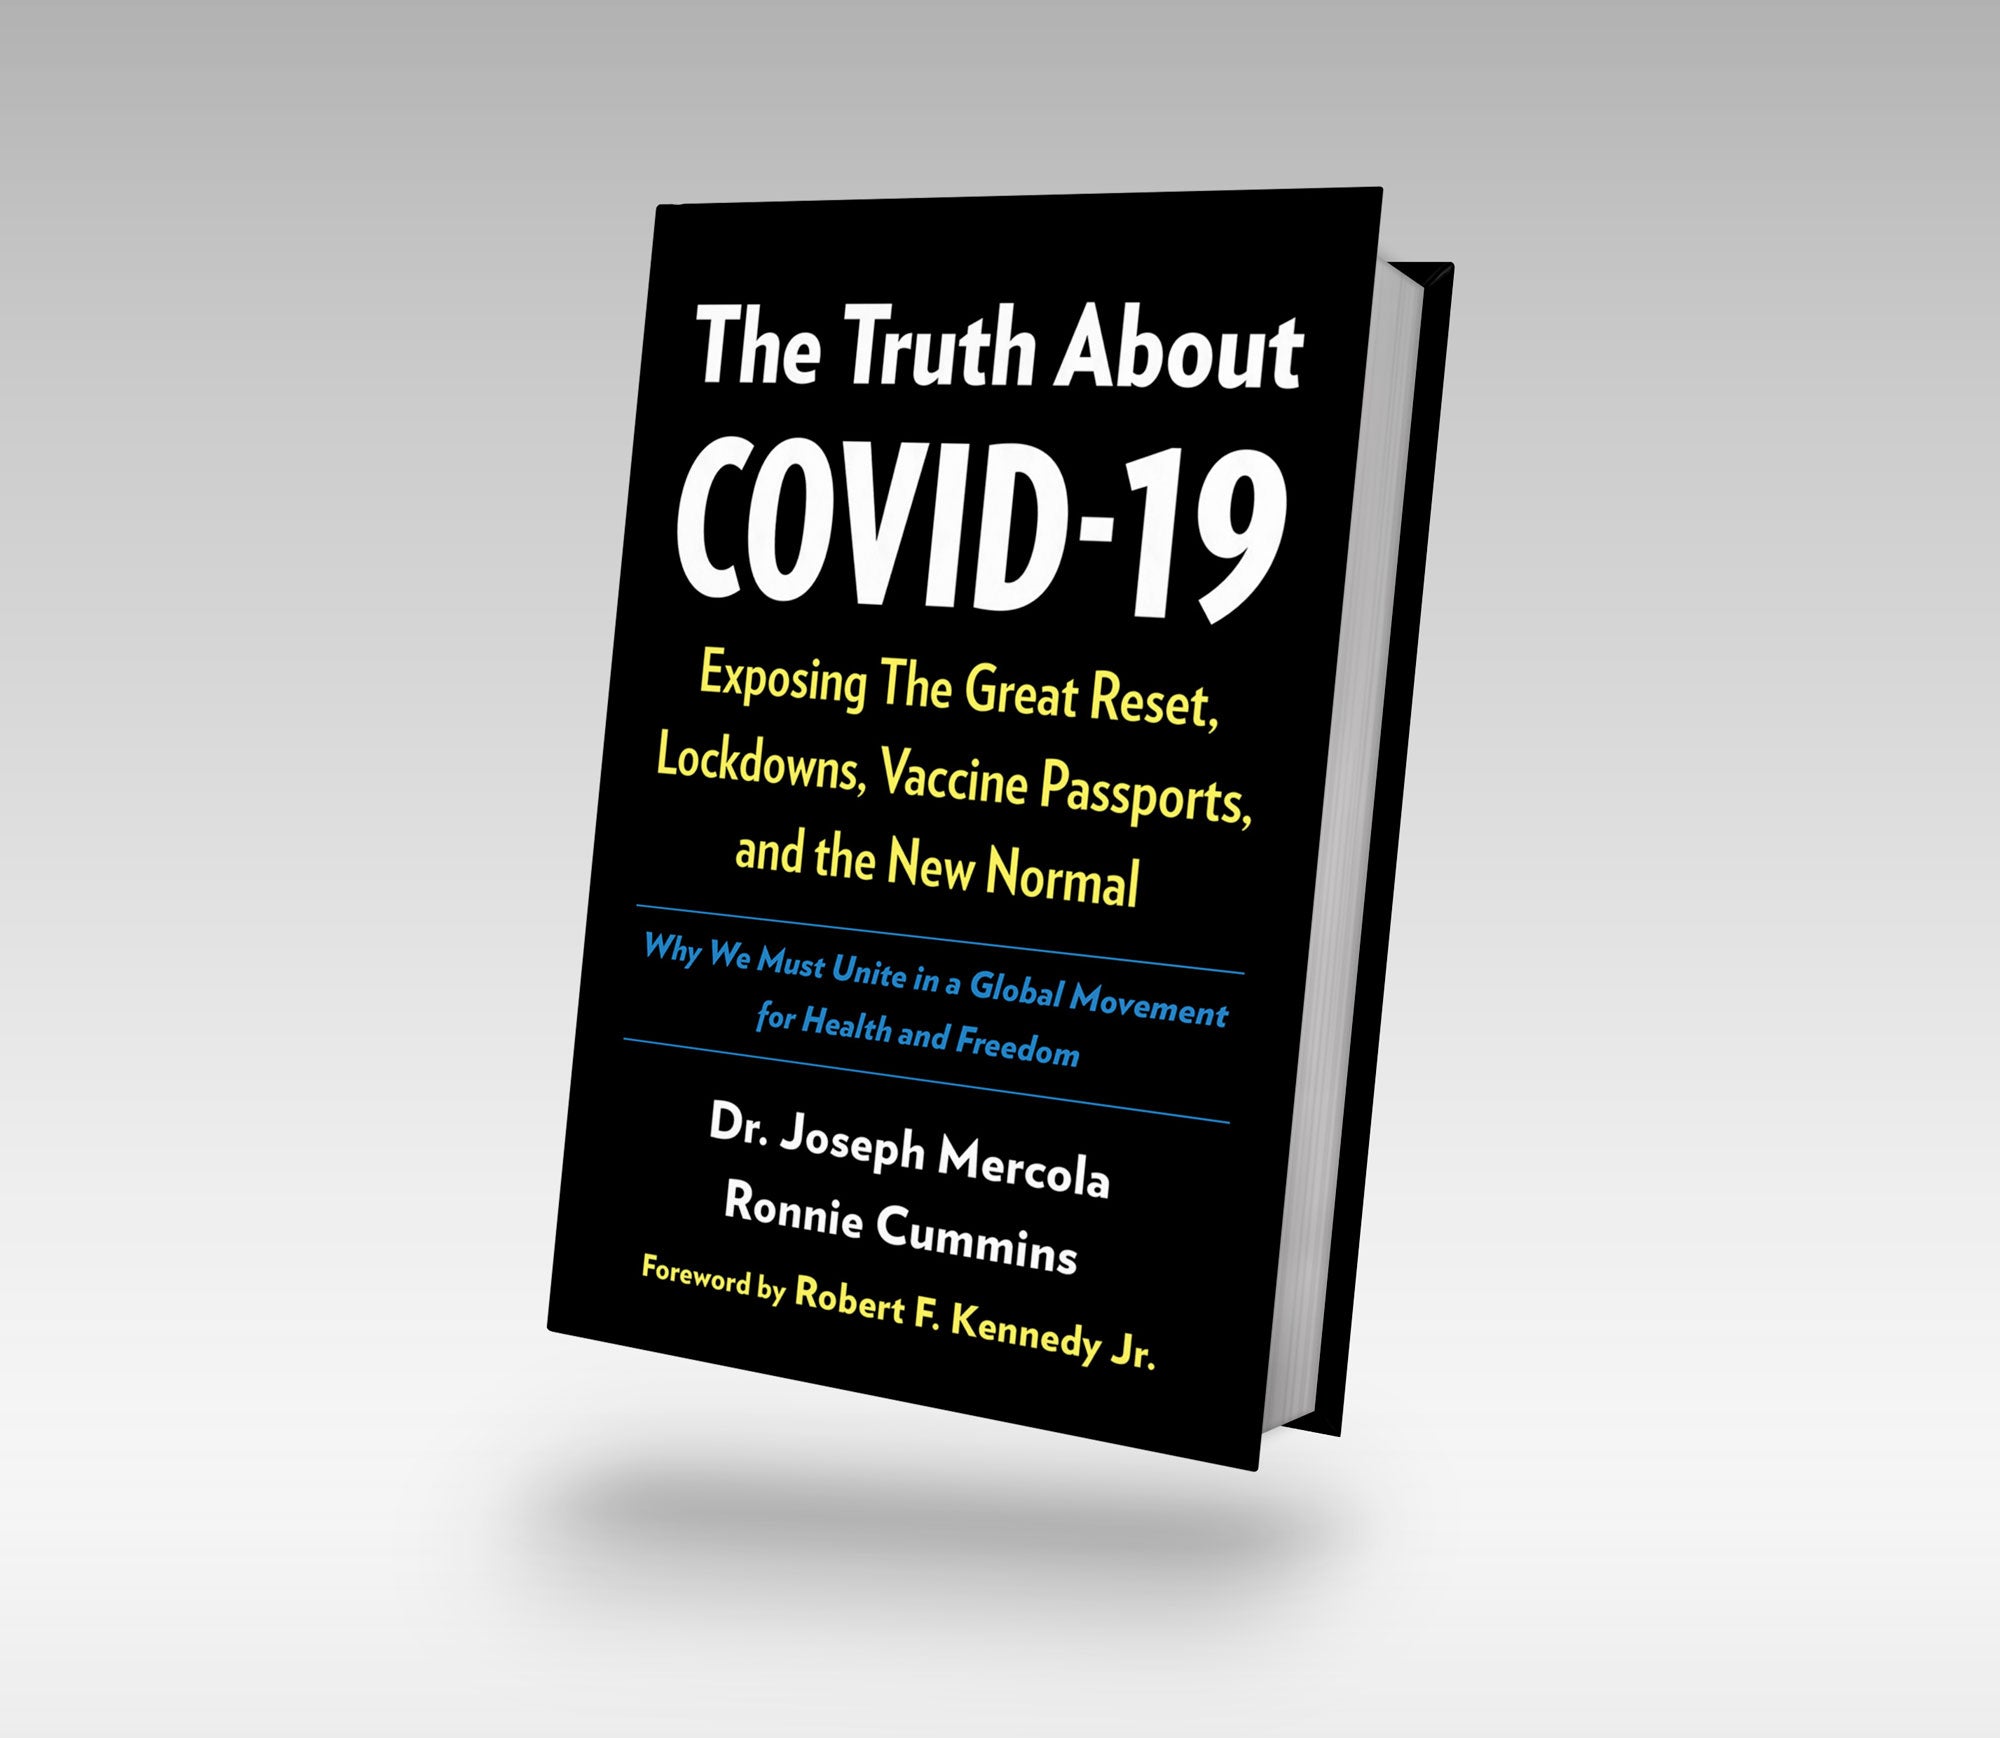 The Truth About COVID-19 by Joseph Mercola & Ronnie Cummins